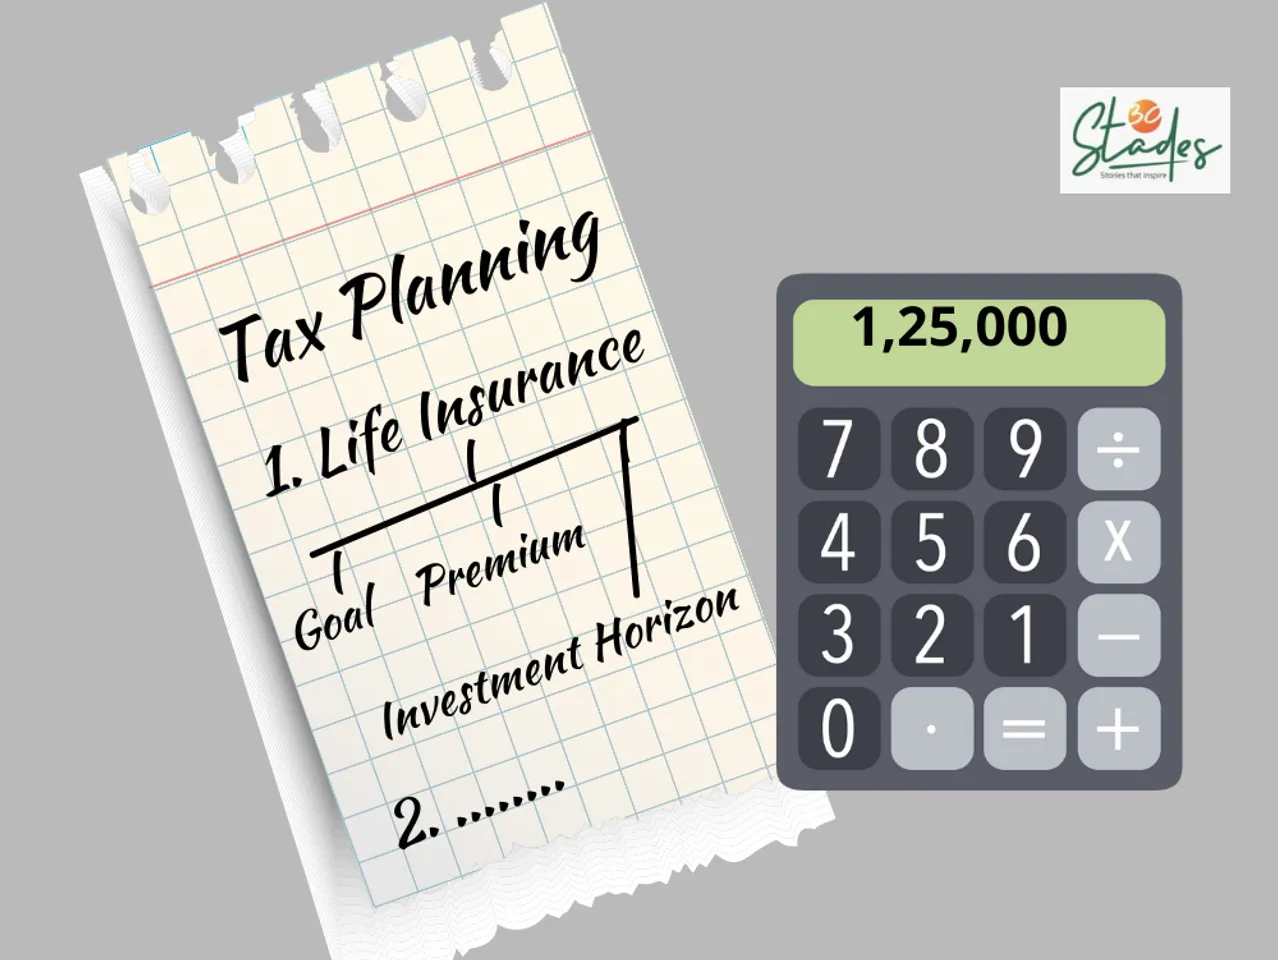 Tax Planning: How to buy the right life insurance policy